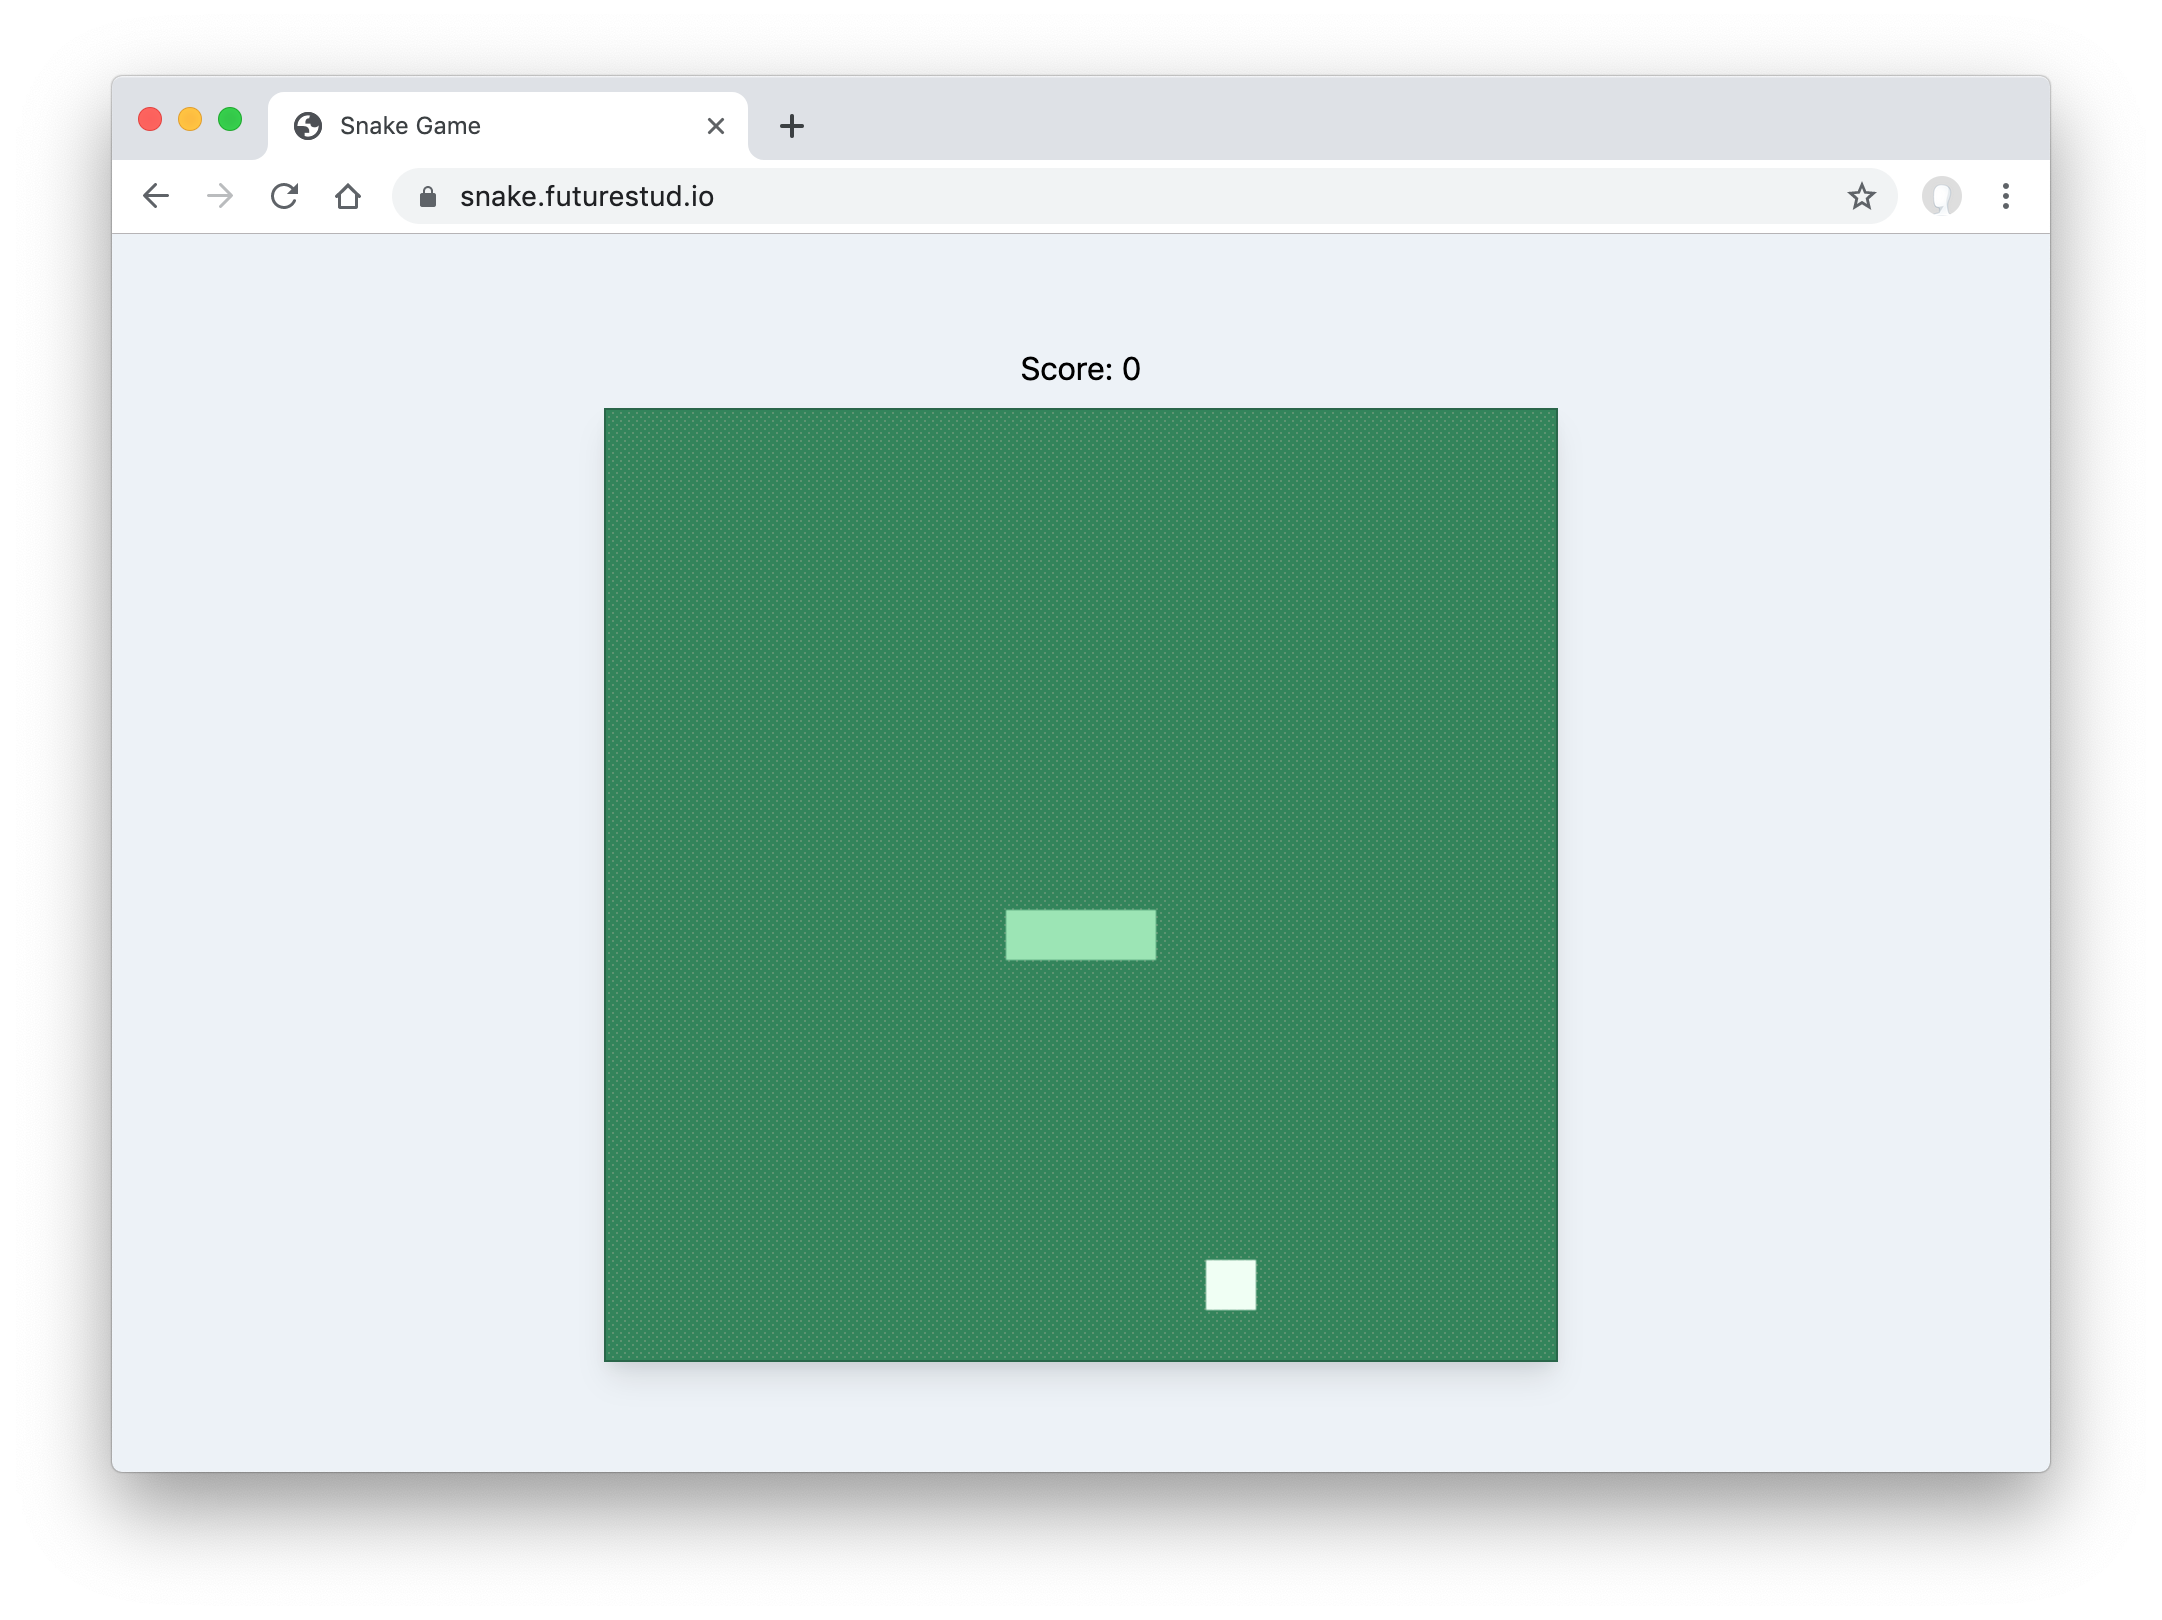 Screenshot of the Snake game in the Browser